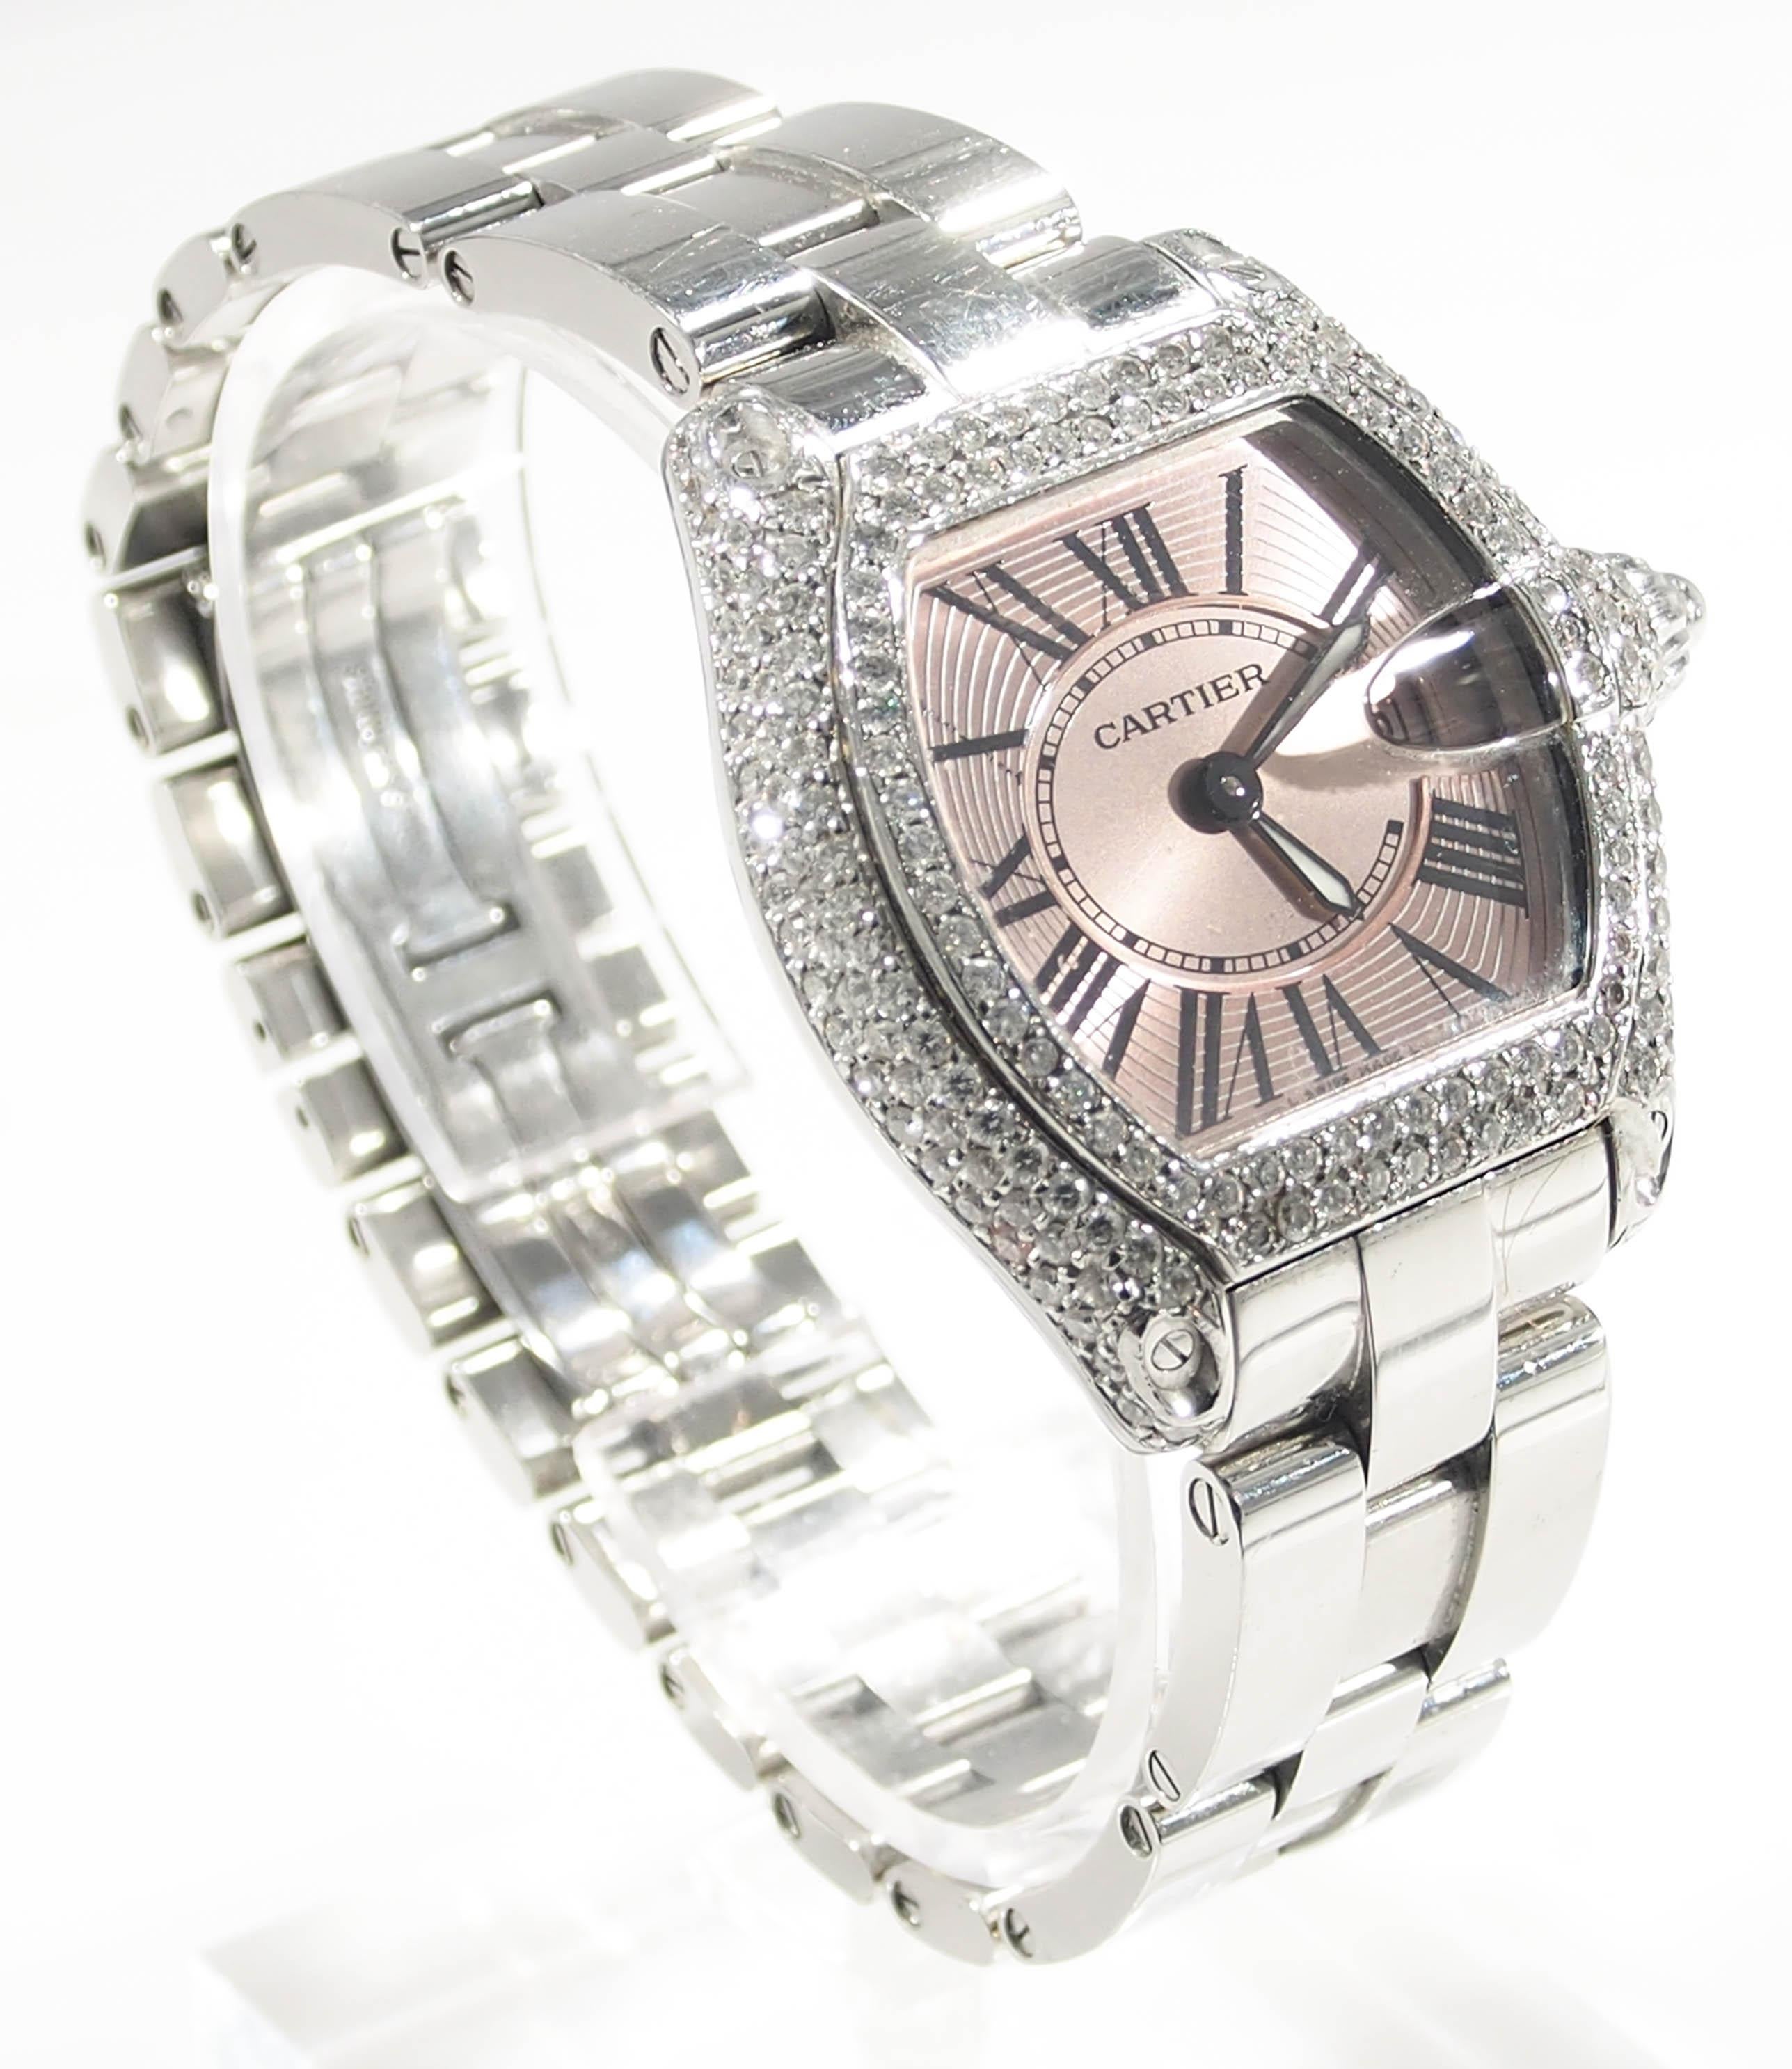 Desired by many is this Cartier Roadster Diamond Bezel Pink Face Roman Numeral Hour,Minute Stainless Steel Watch including the Box. This watch is a (Ladies) small and approximately 5 years old. The measurements are: Dial 21 millimeters by 22